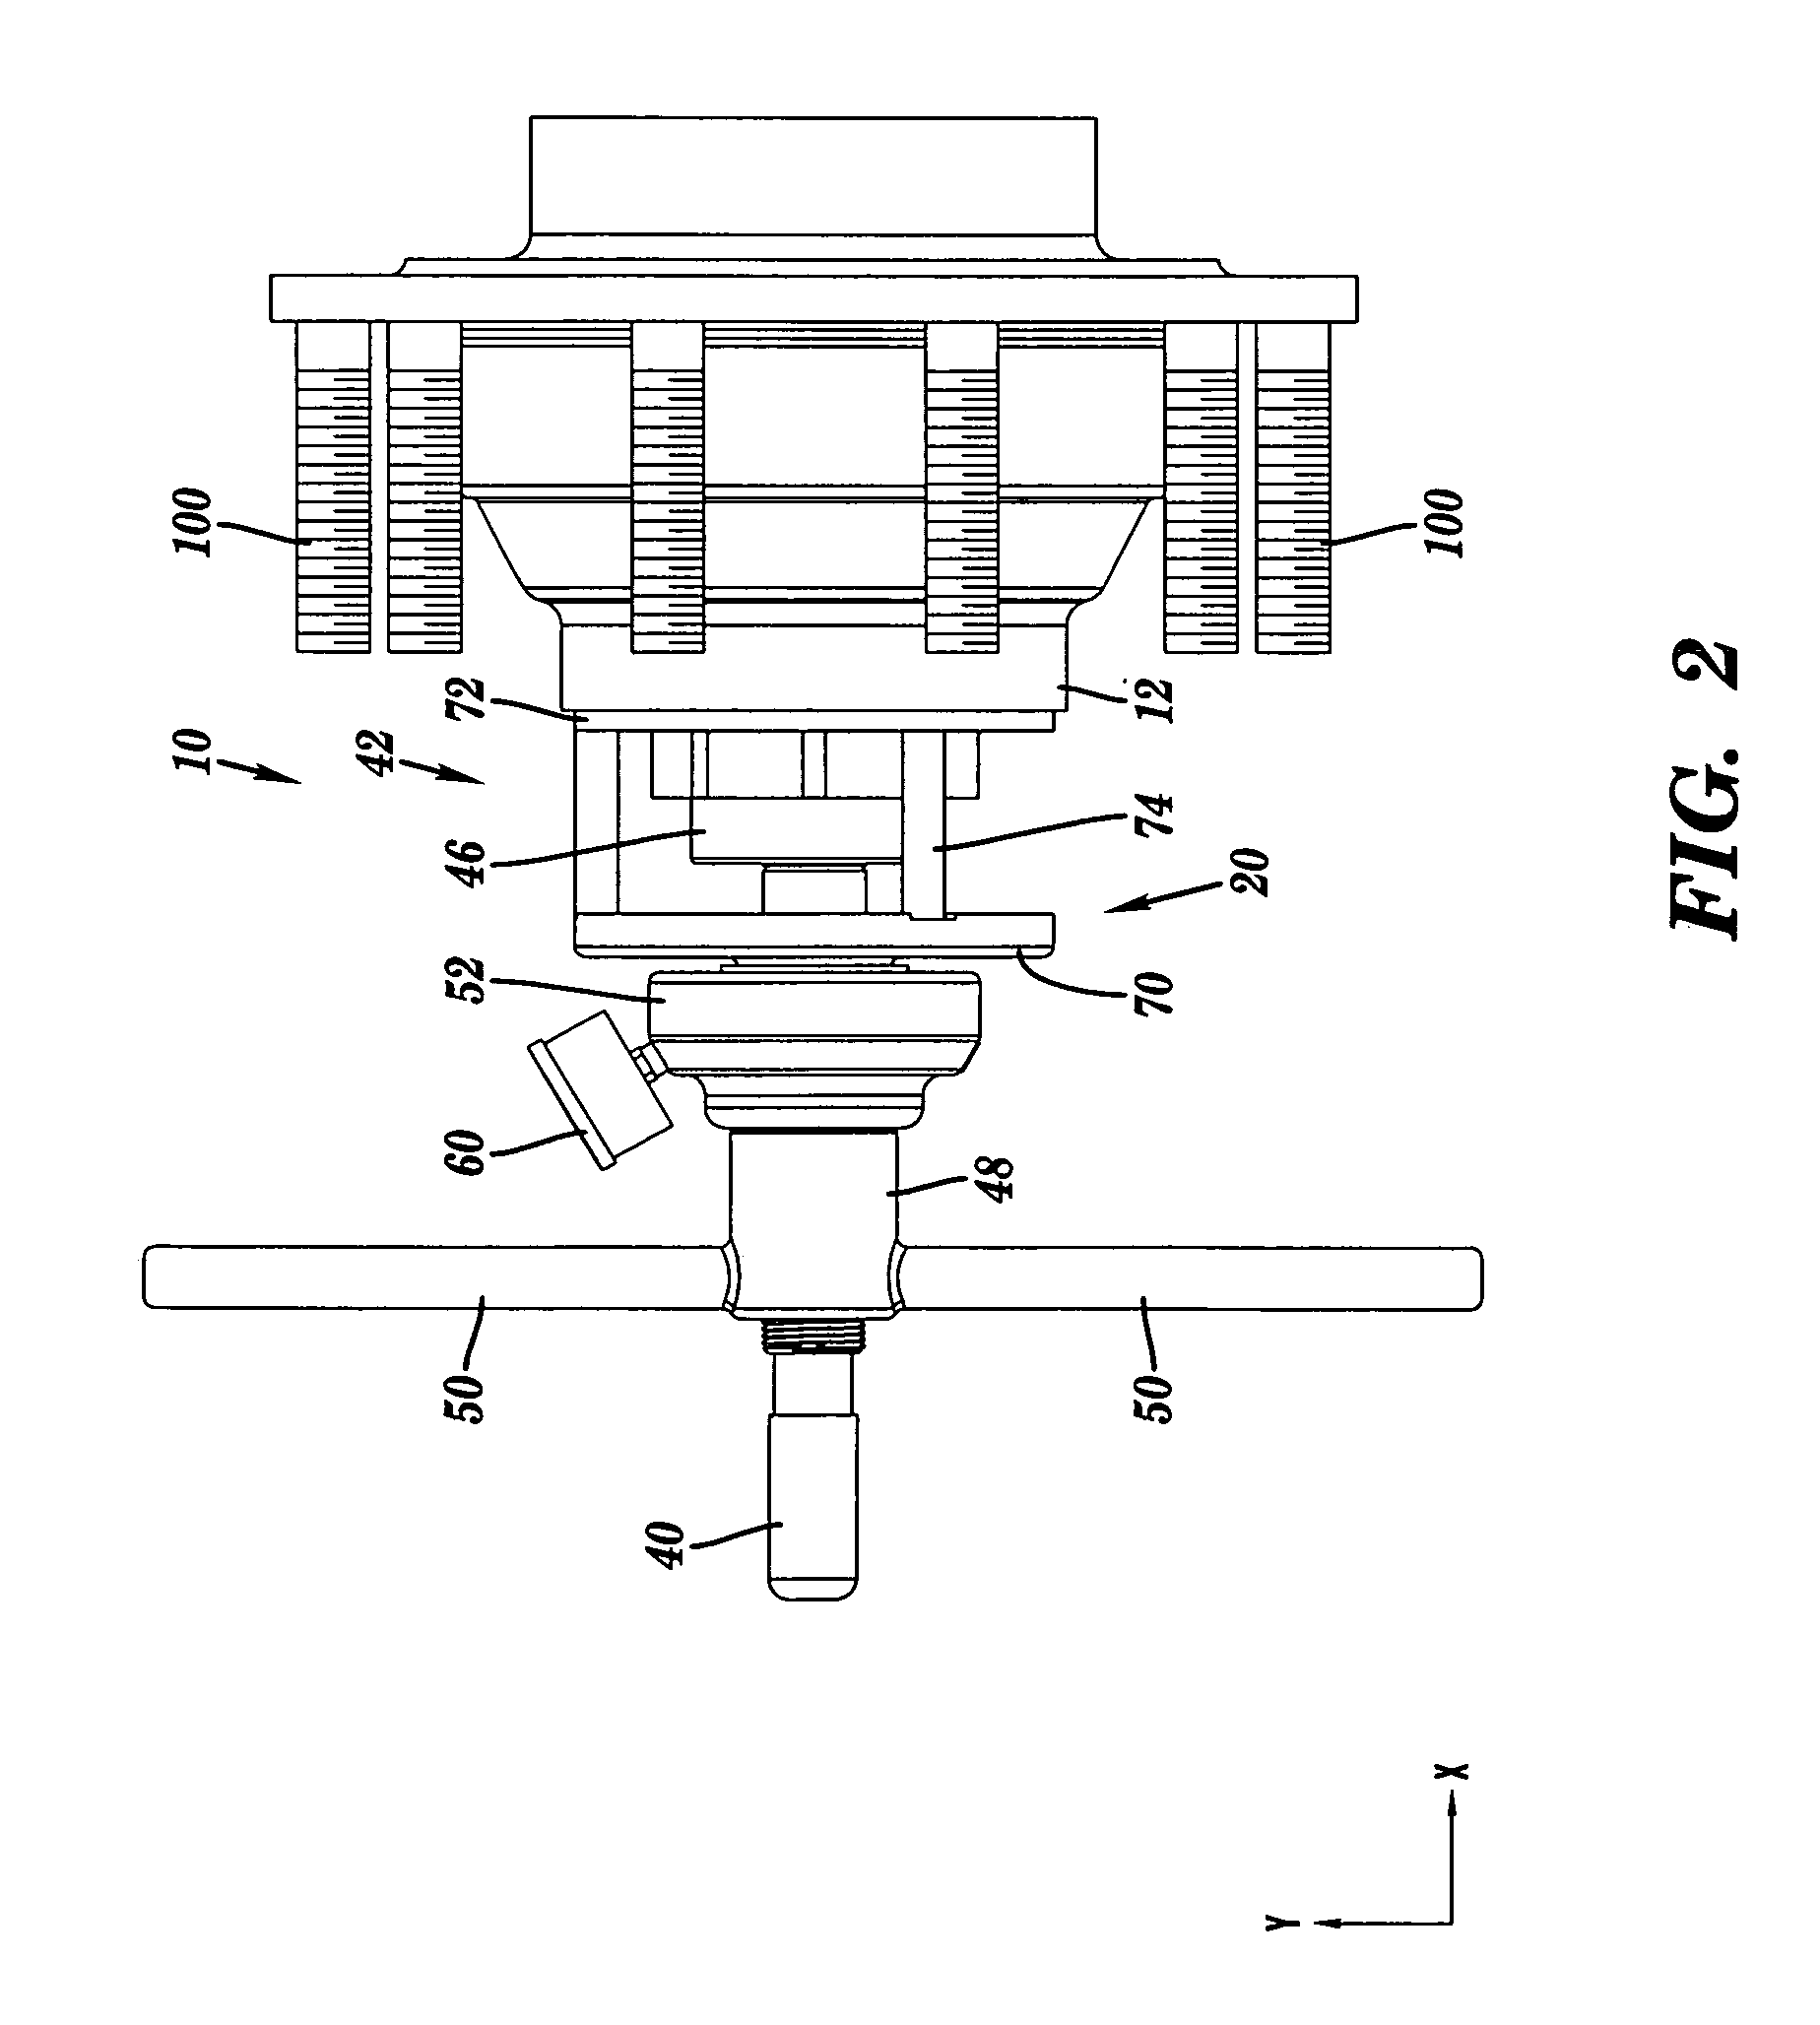 Apparatus for providing a load on a bearing, the bearing having an inner race mounted to a shaft and the bearing retained by a nut